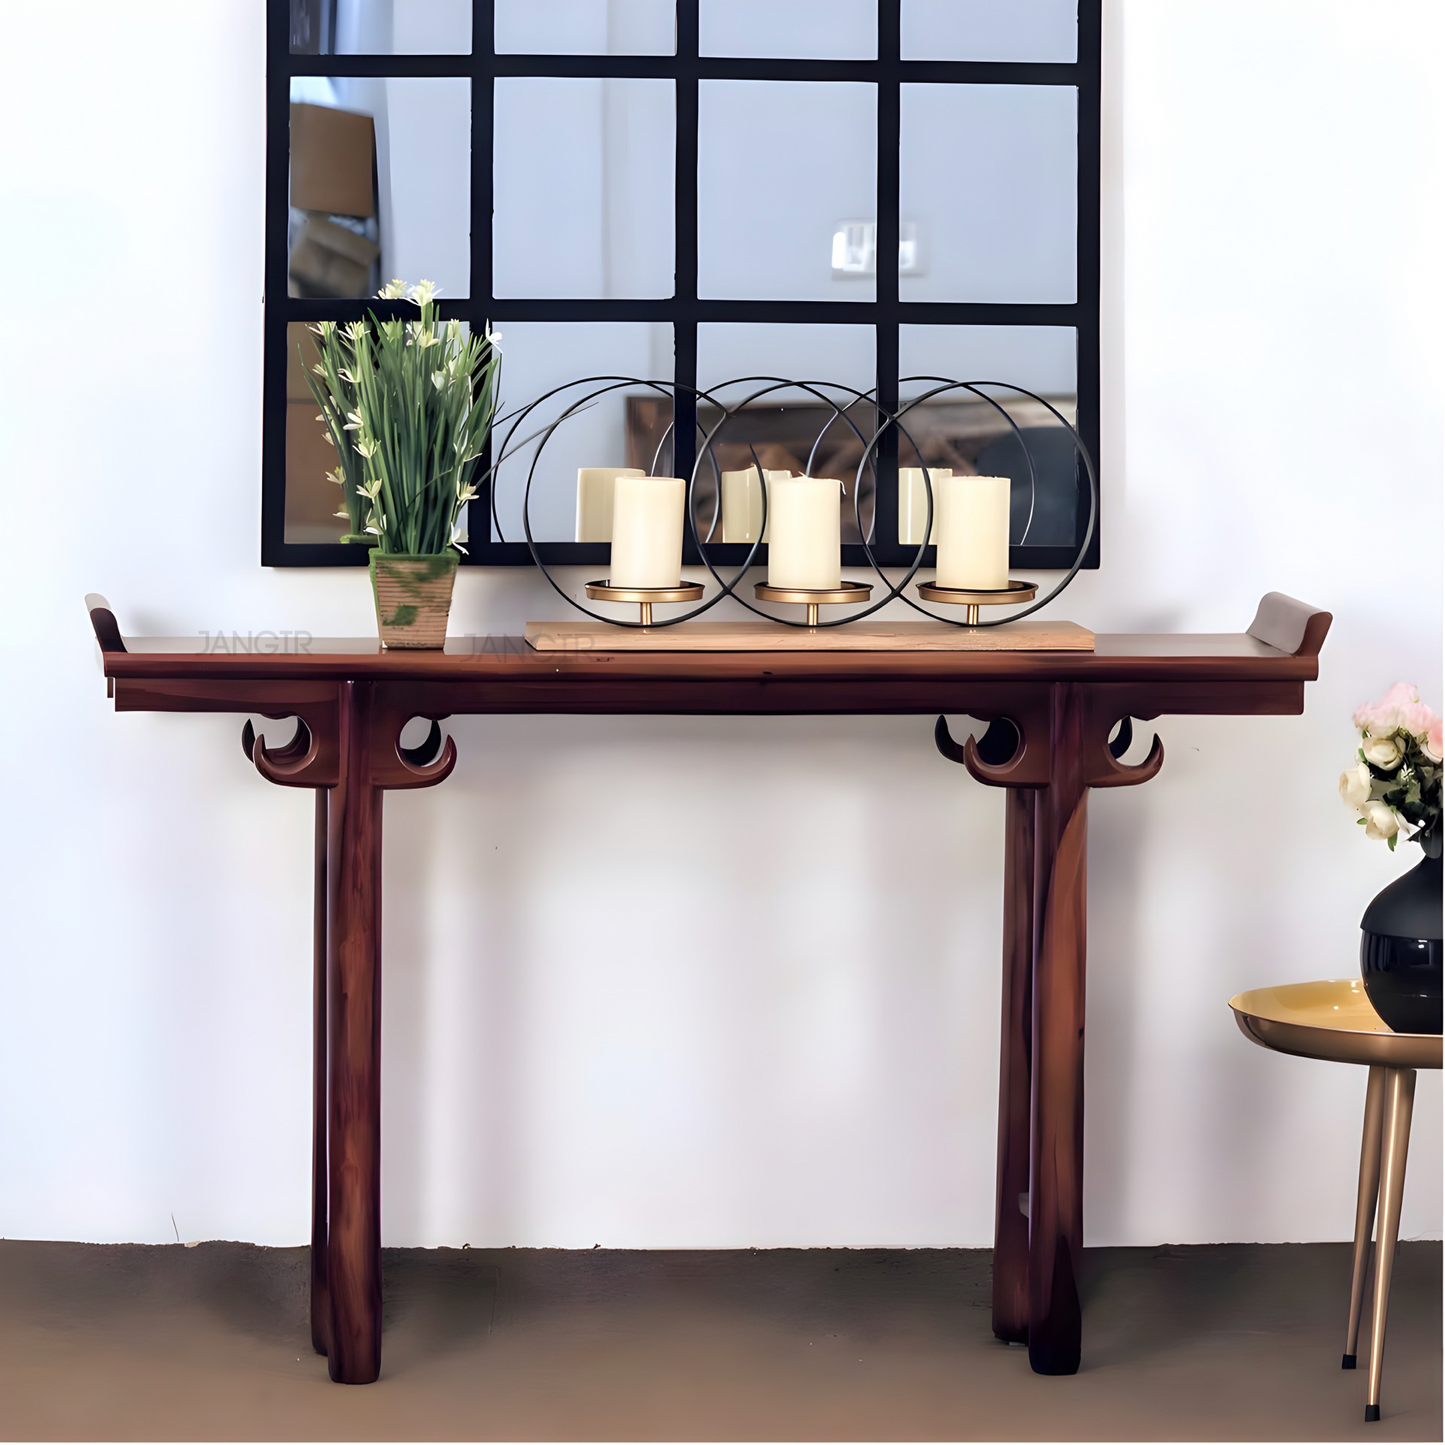 Complete your living room with our elegant Taj Solid Wood Console Table, crafted from sheesham wood, this Designer Console Table is ideal for any Living room or foyer. Shop now!